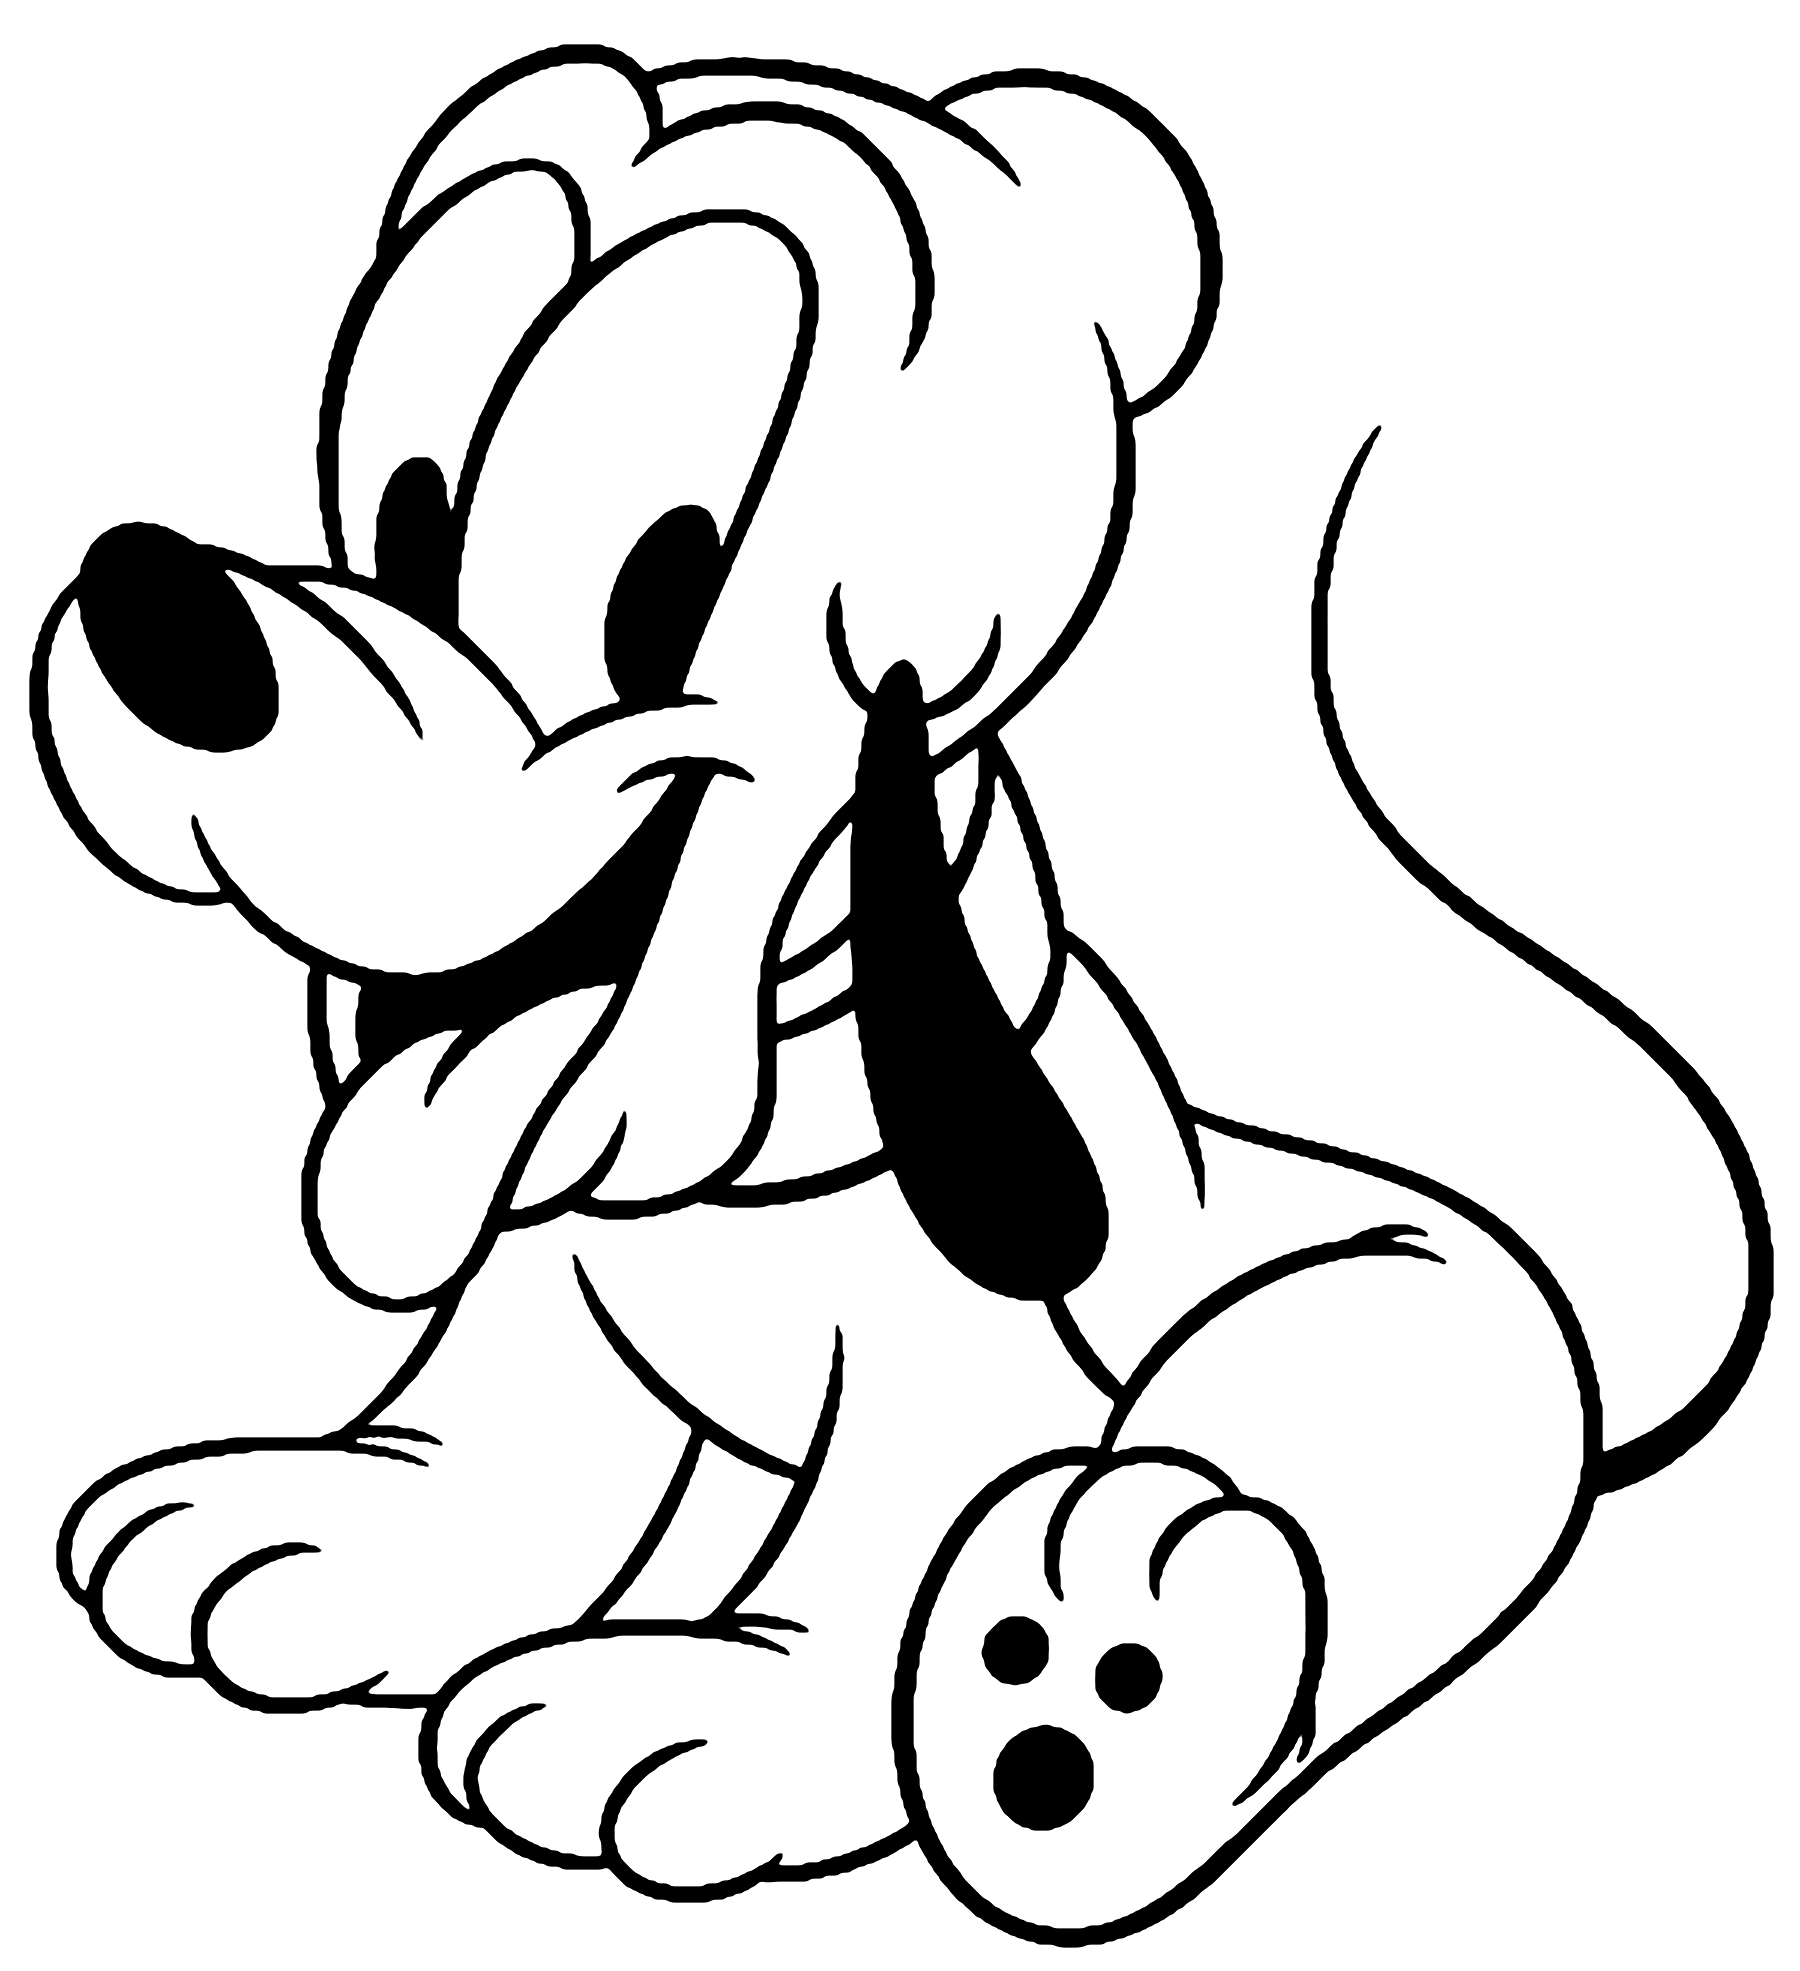 Cute Baby Pluto Coloring Page for Toddlers